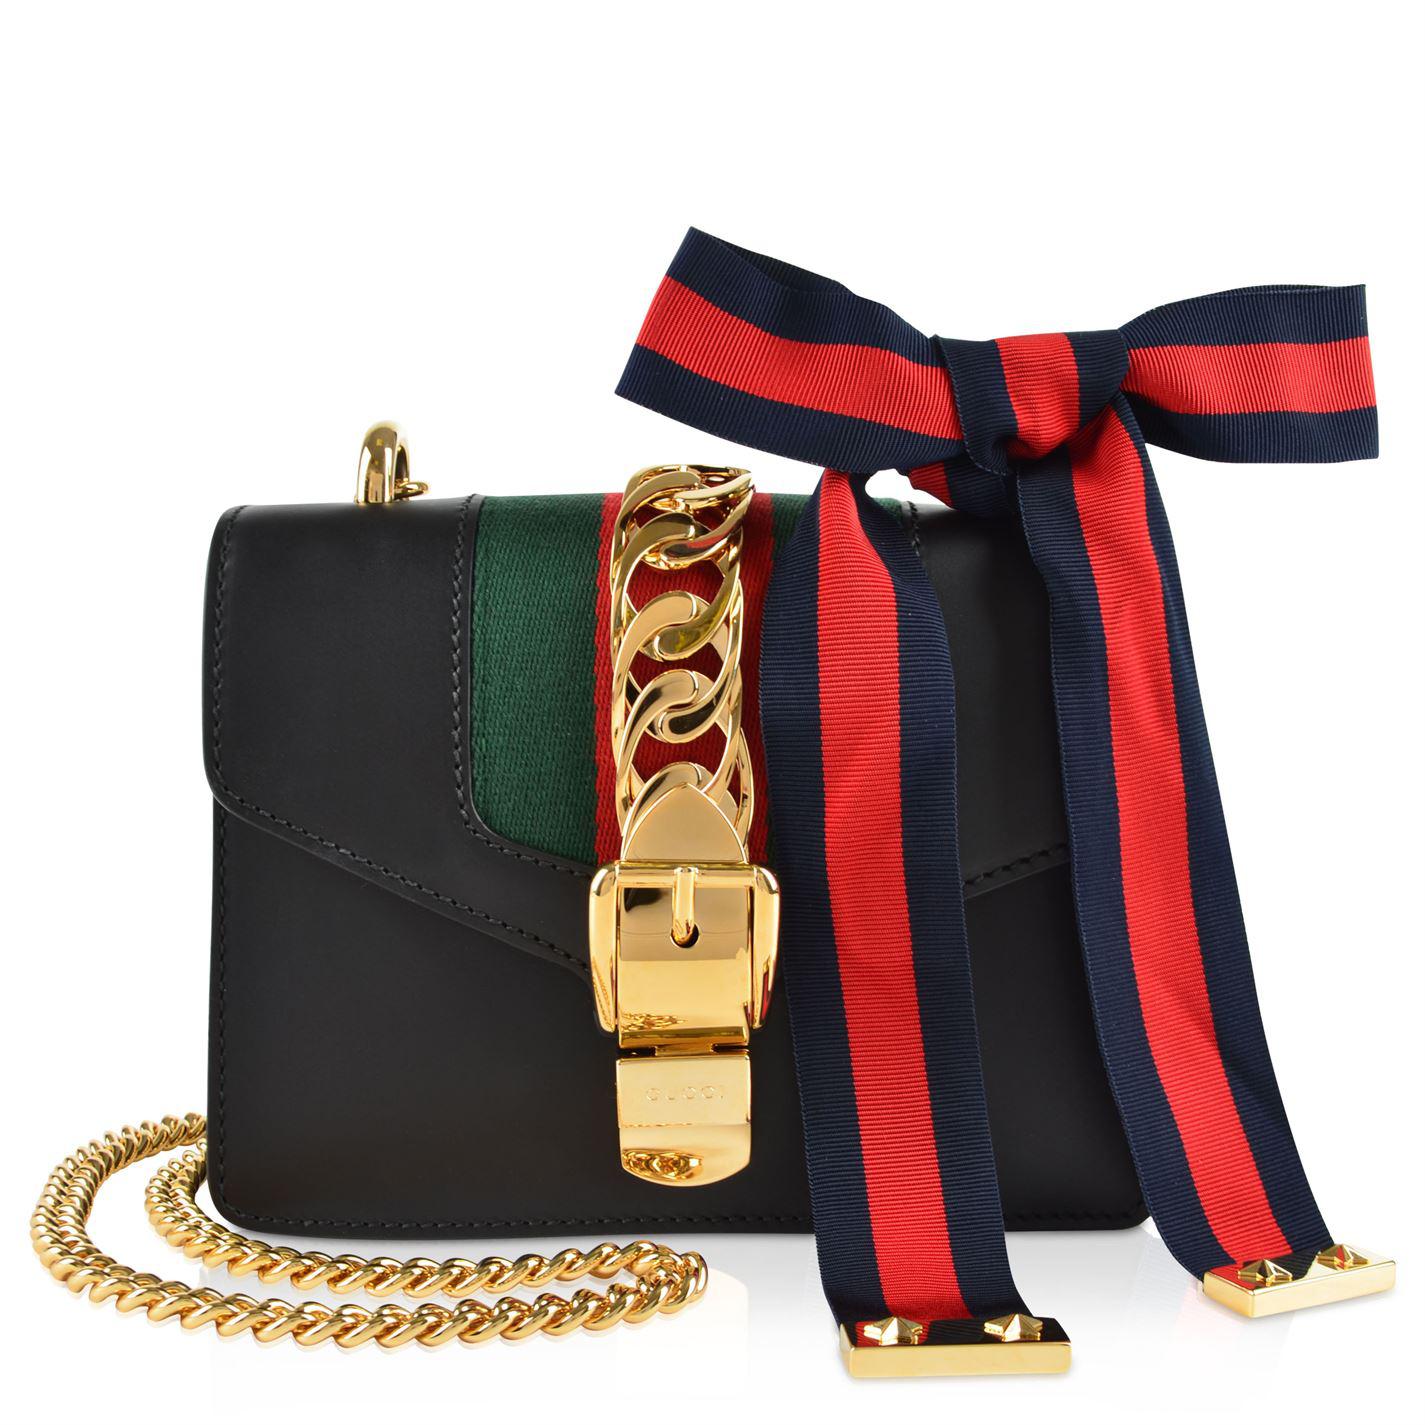 Lyst - Gucci Sylvie Leather Mini Chain Bag in Black - Save 13.907284768211923%